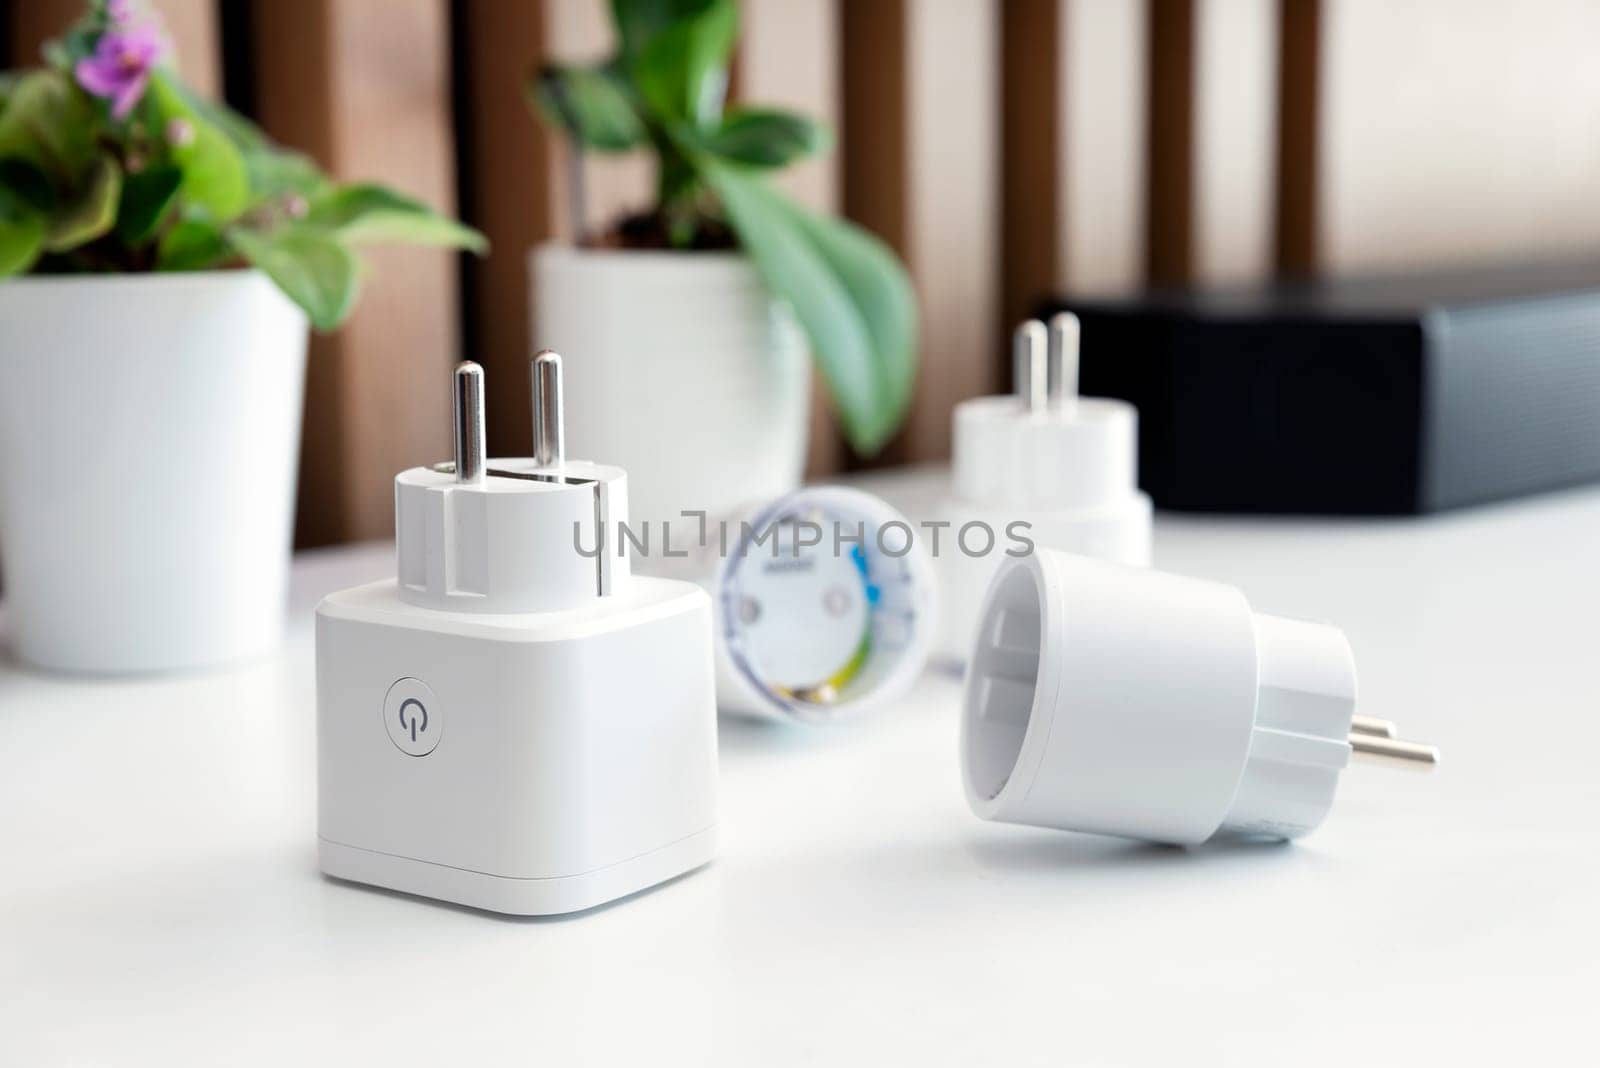 Using smart sockets in a smart home by simpson33